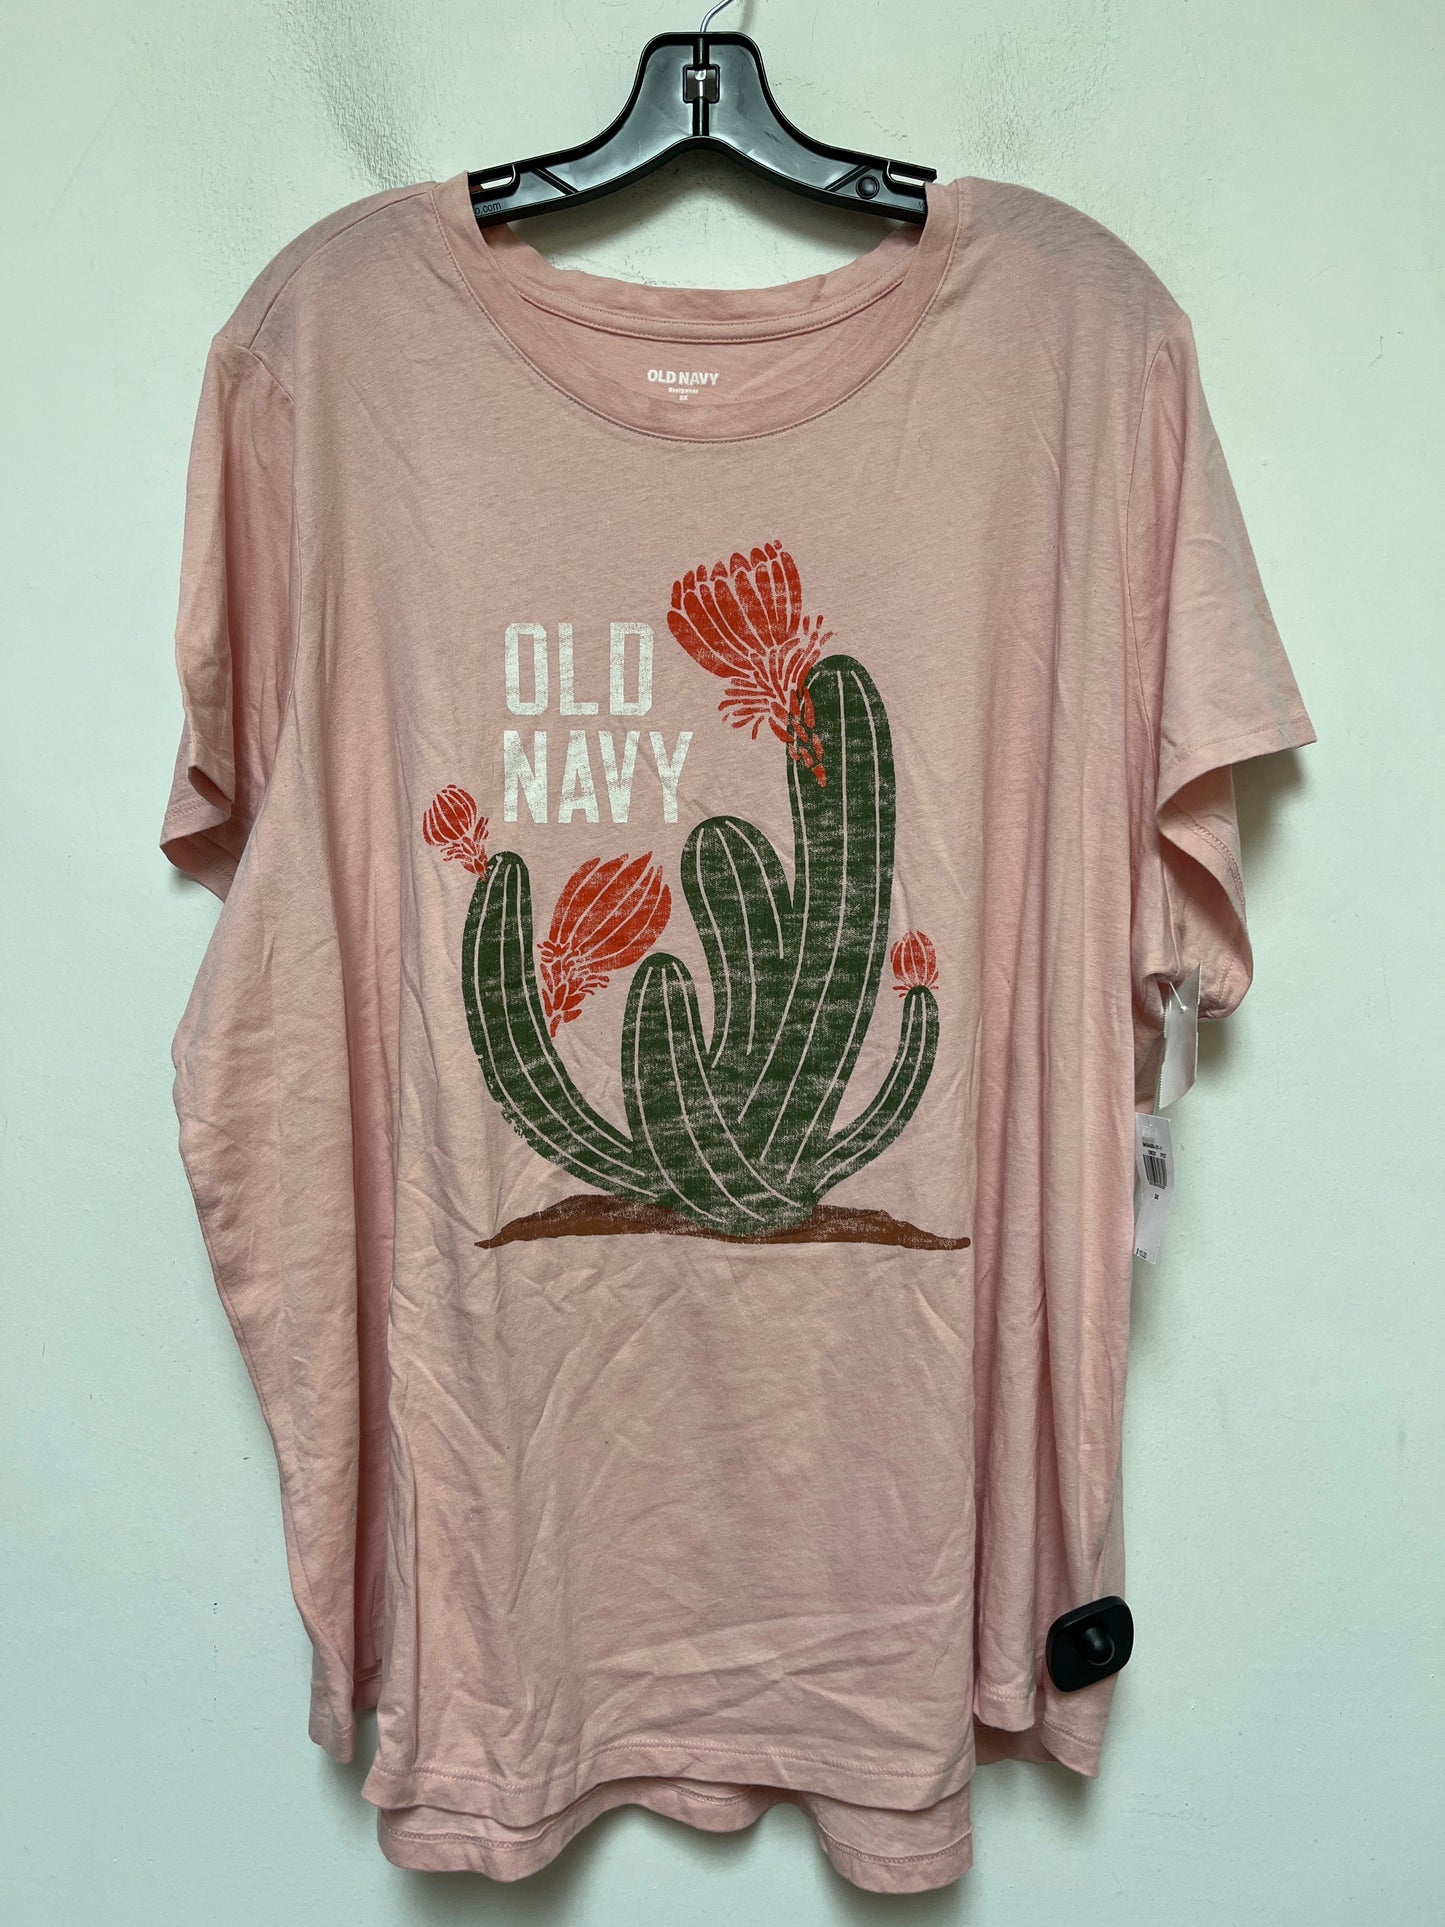 Pink Top Short Sleeve Basic Old Navy, Size 3x